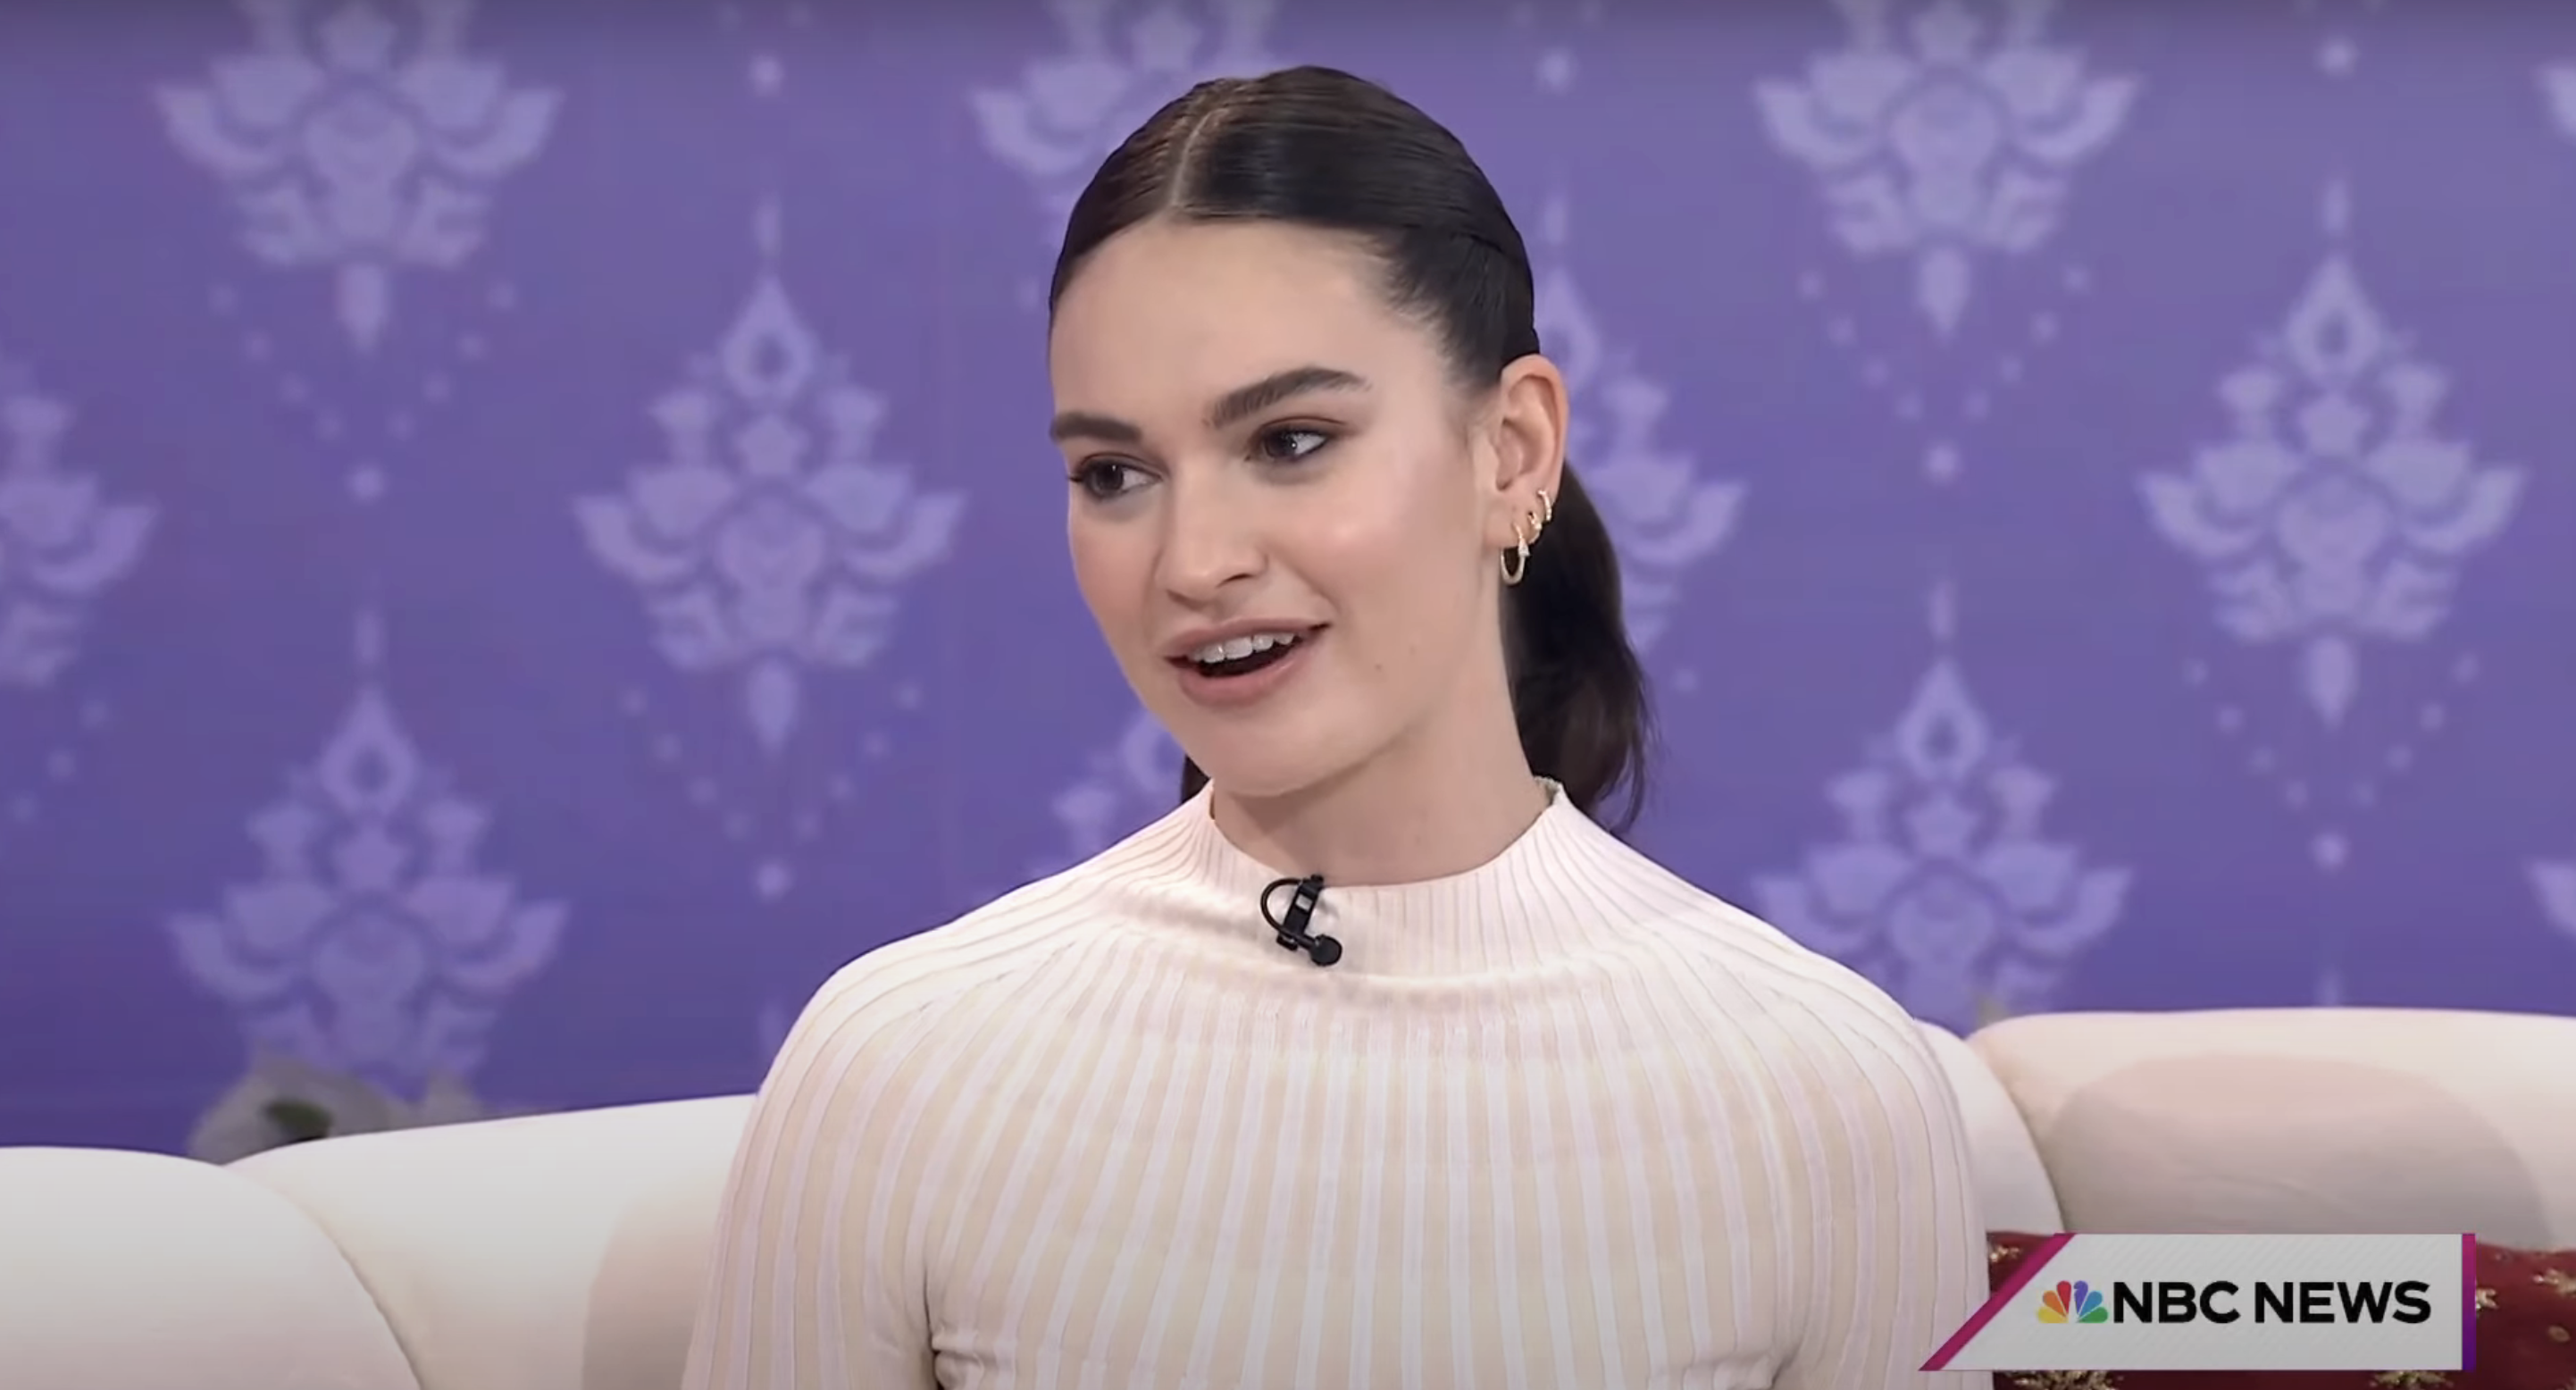 Lily in a ribbed top with a high collar, sitting on a sofa during a TV interview